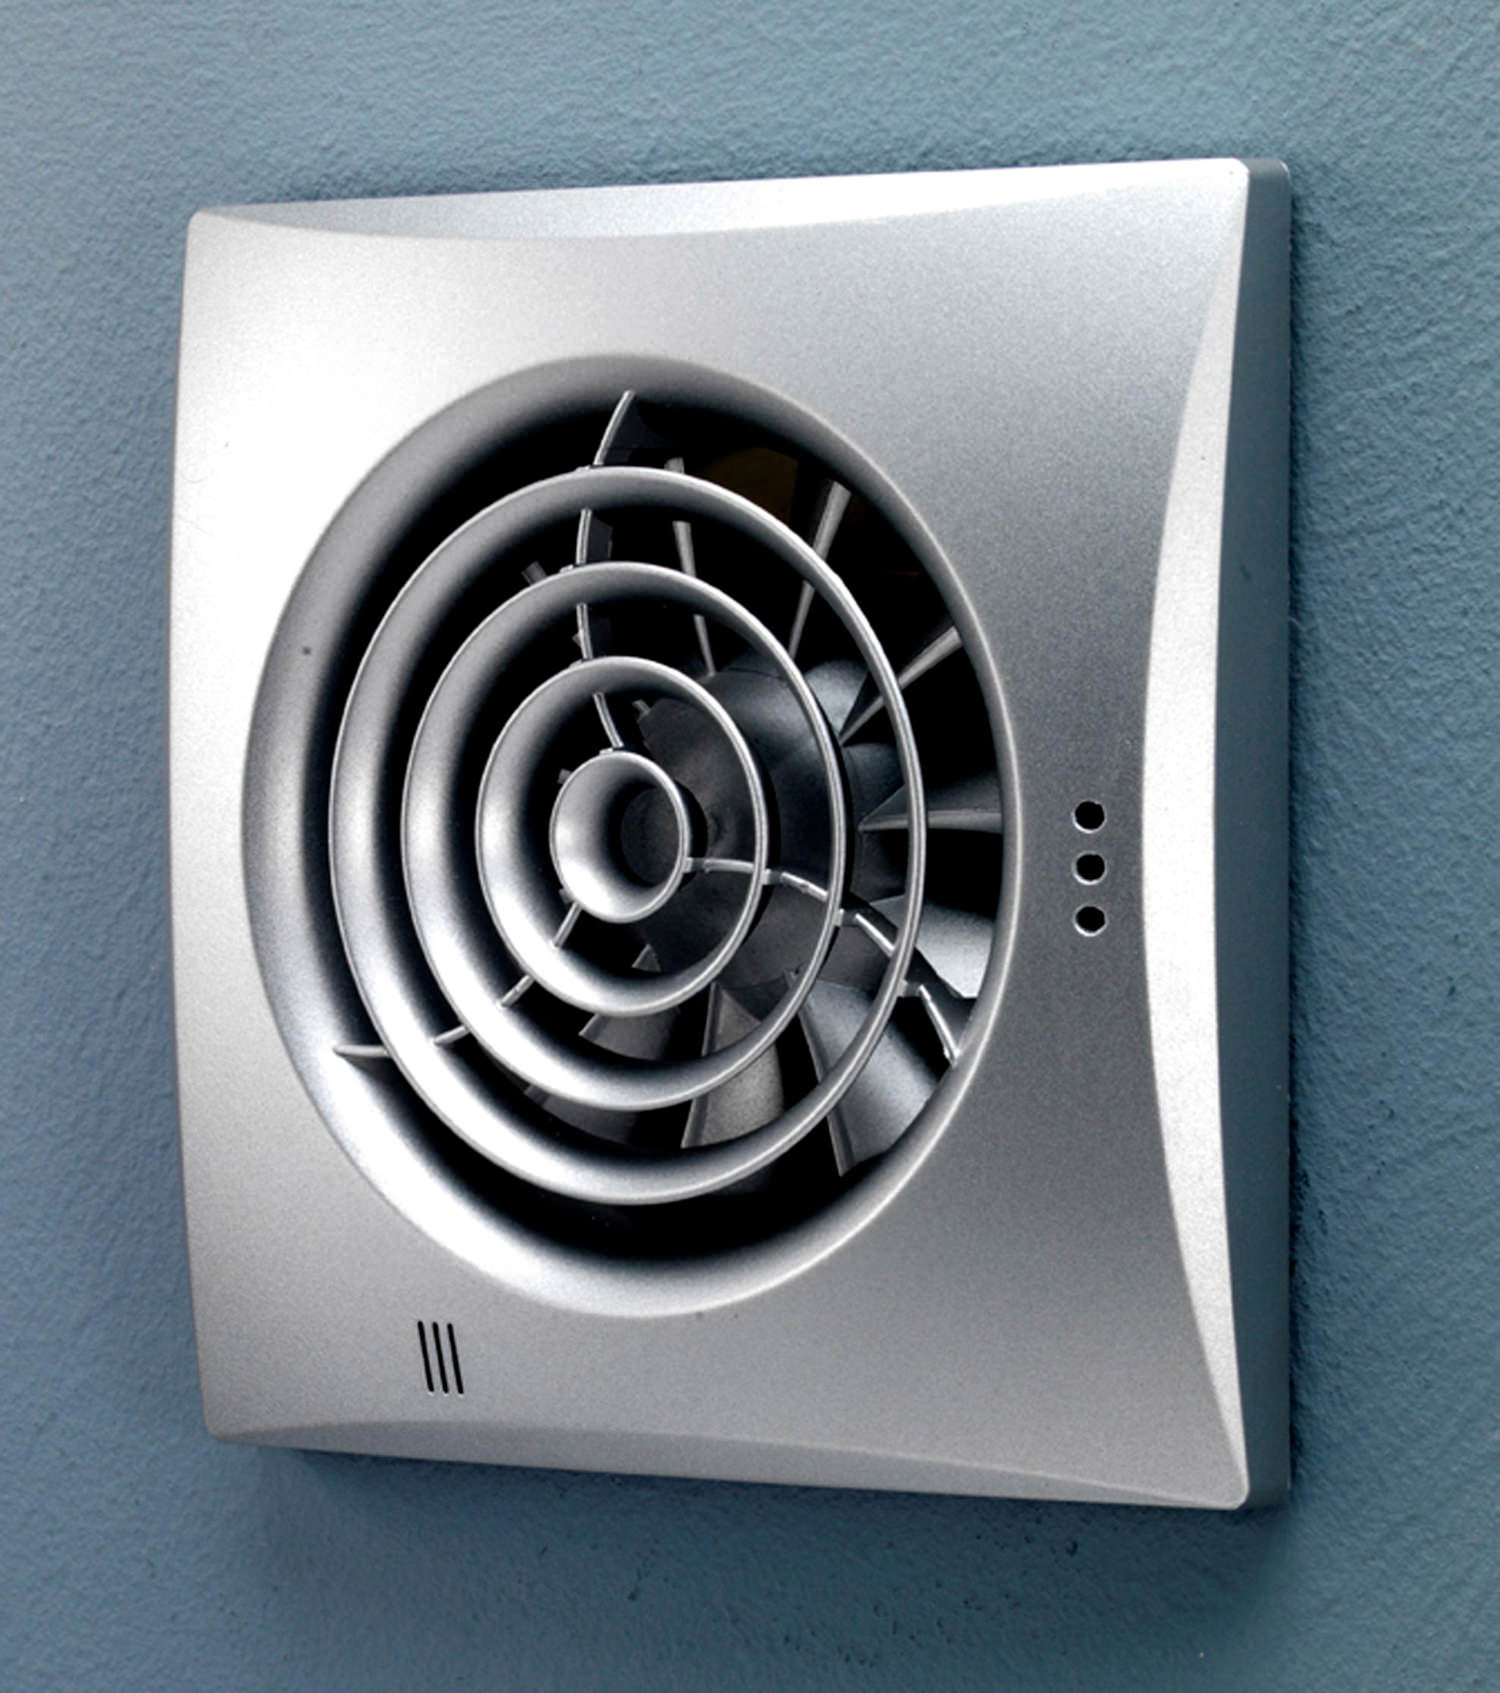 Hib Hush Wall Mounted Extractor Fan With Timer And Humidity Sensor pertaining to dimensions 1500 X 1693